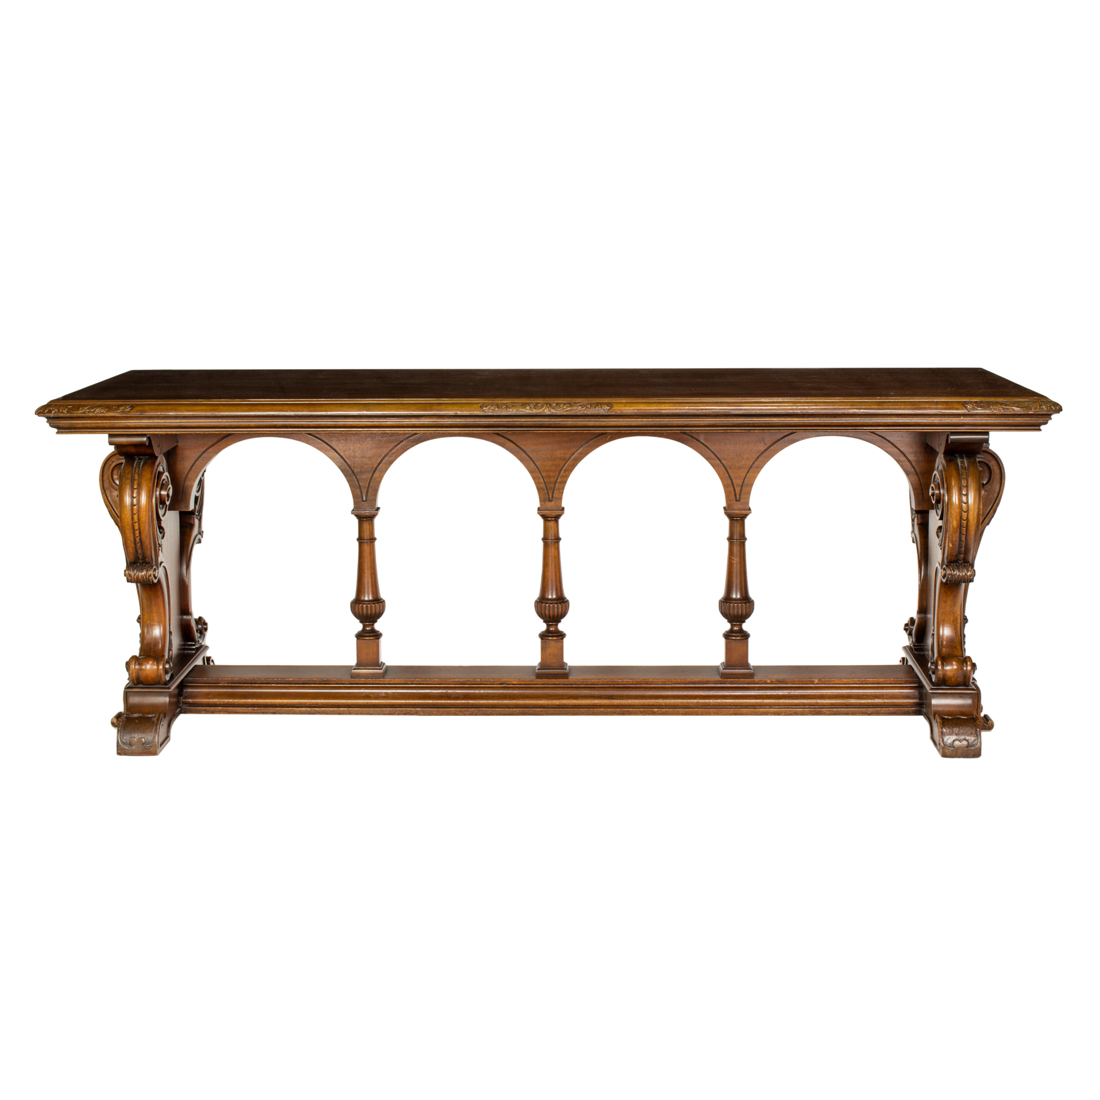 A CONTINENTAL TRESTLE TABLE A Continental